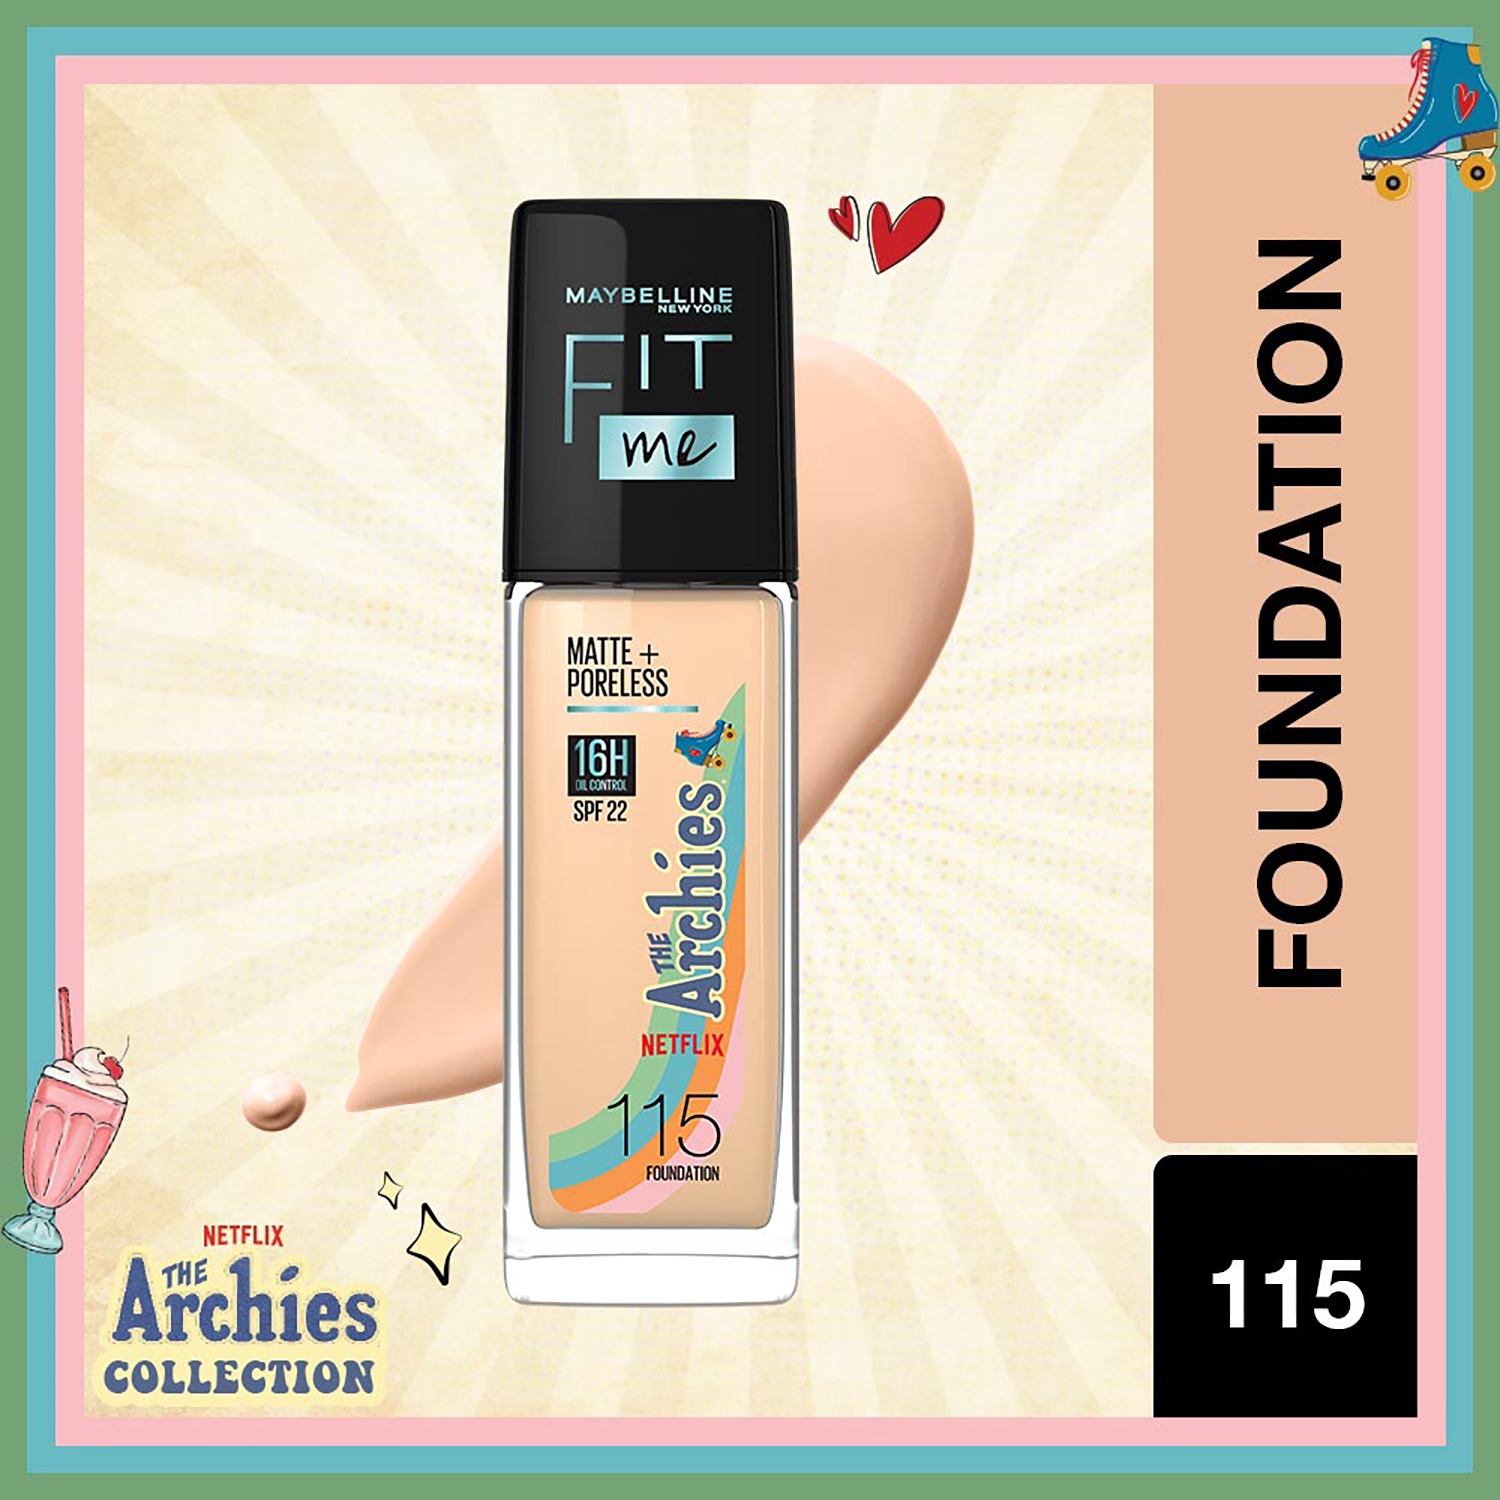 Maybelline NY Fit Me Foundation (30ml) - The Collection 115 Matte+Poreless Archies